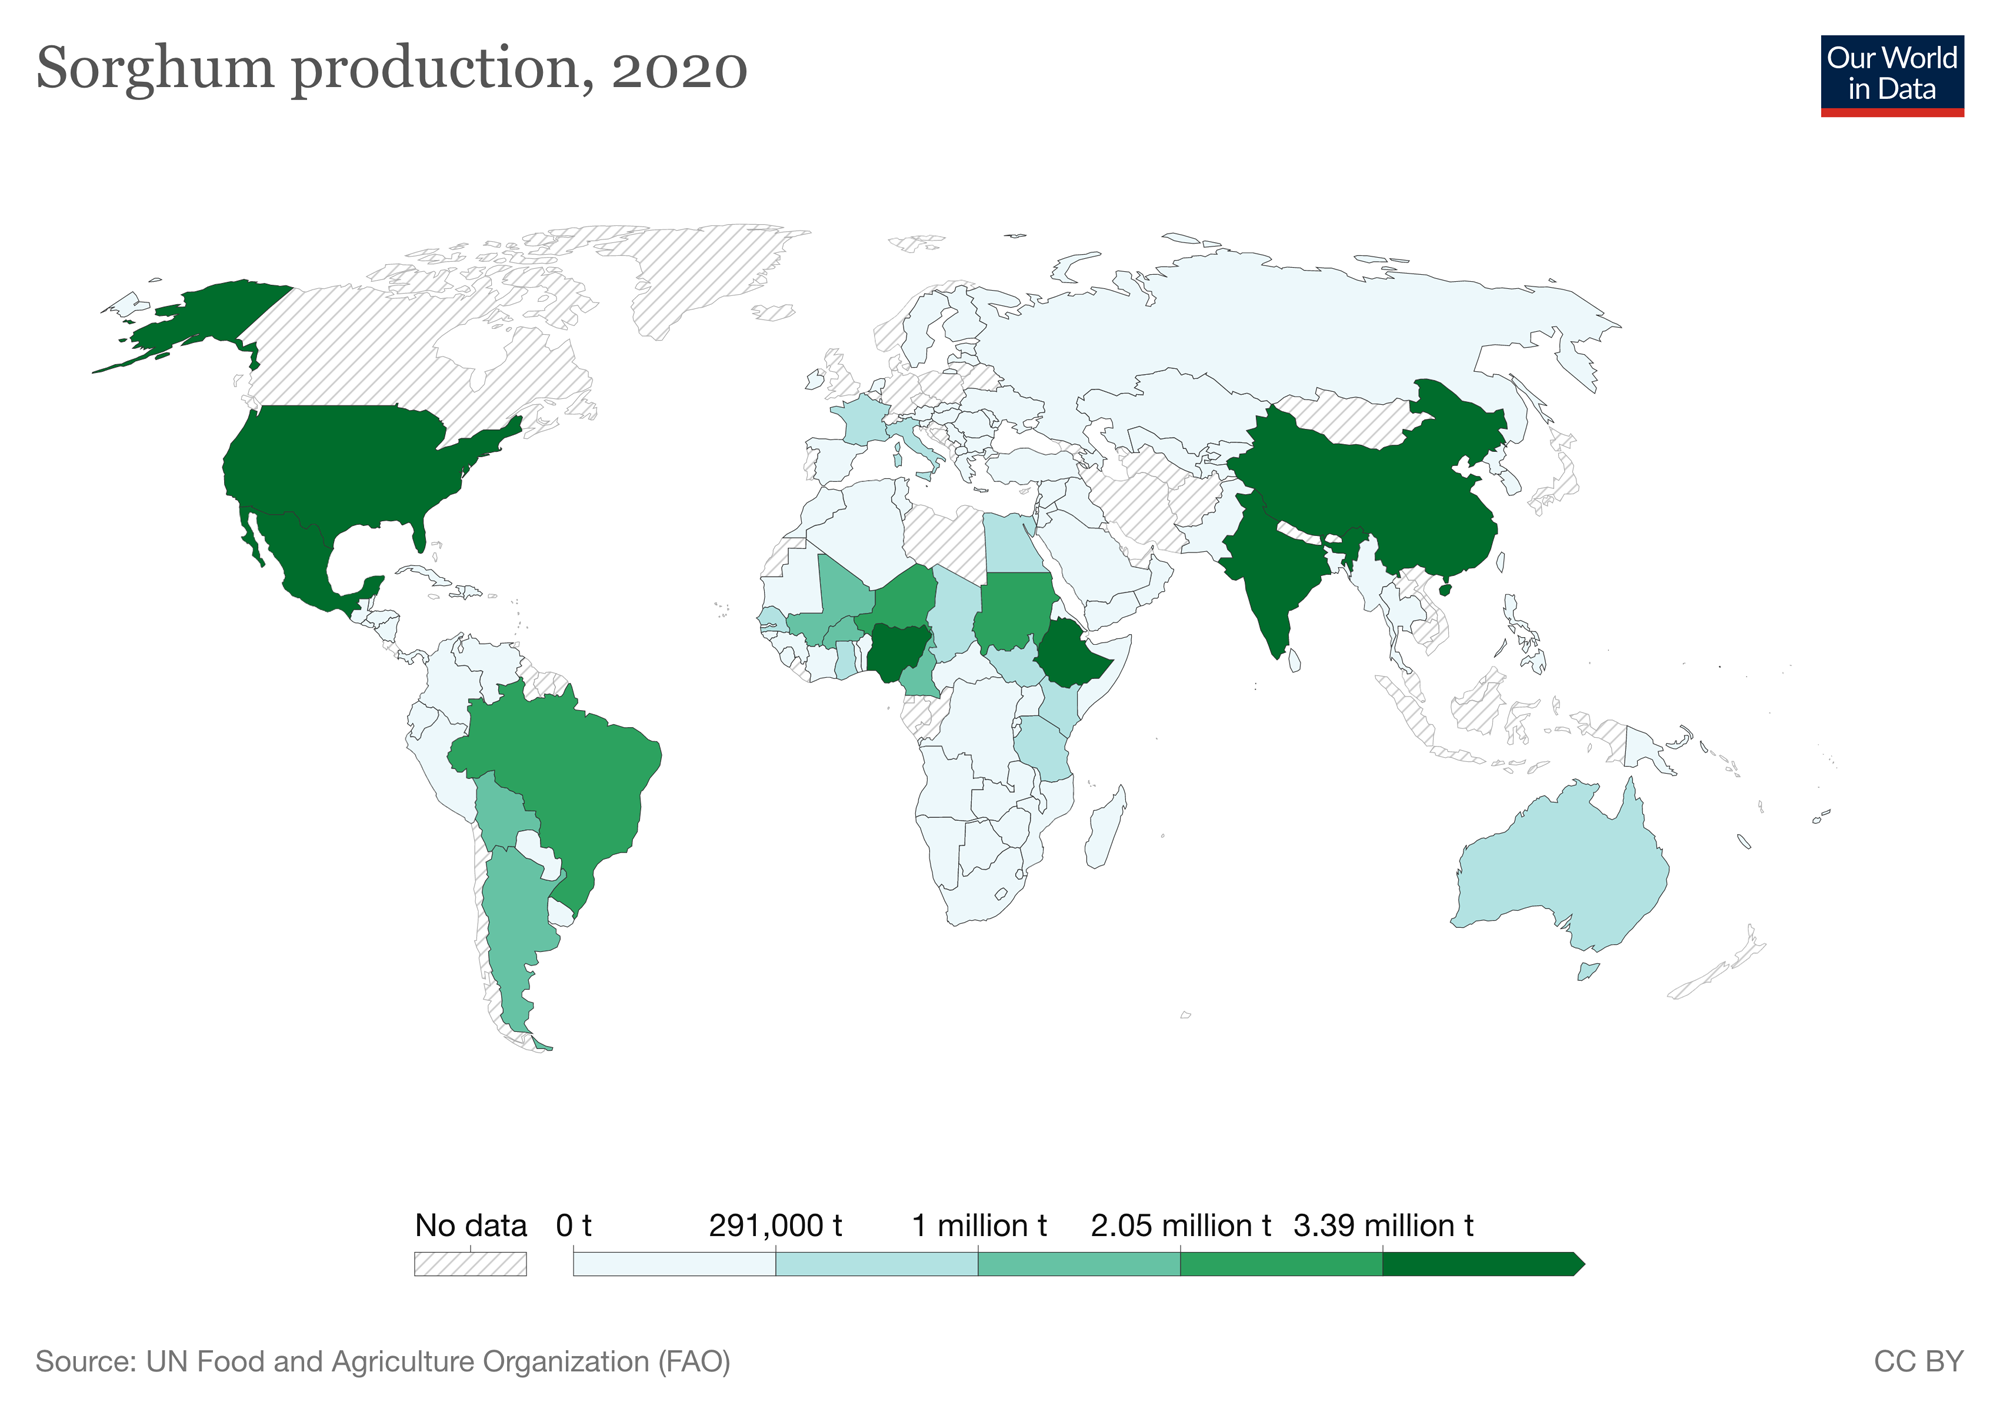 World map showing sorghum production in 2020. Countries are shaded lighter green to indicate less production, darker green to indicate more production. The top producers (dark green countries) are the U.S.A., Mexico, Nigeria, Ethiopia, India, and China.